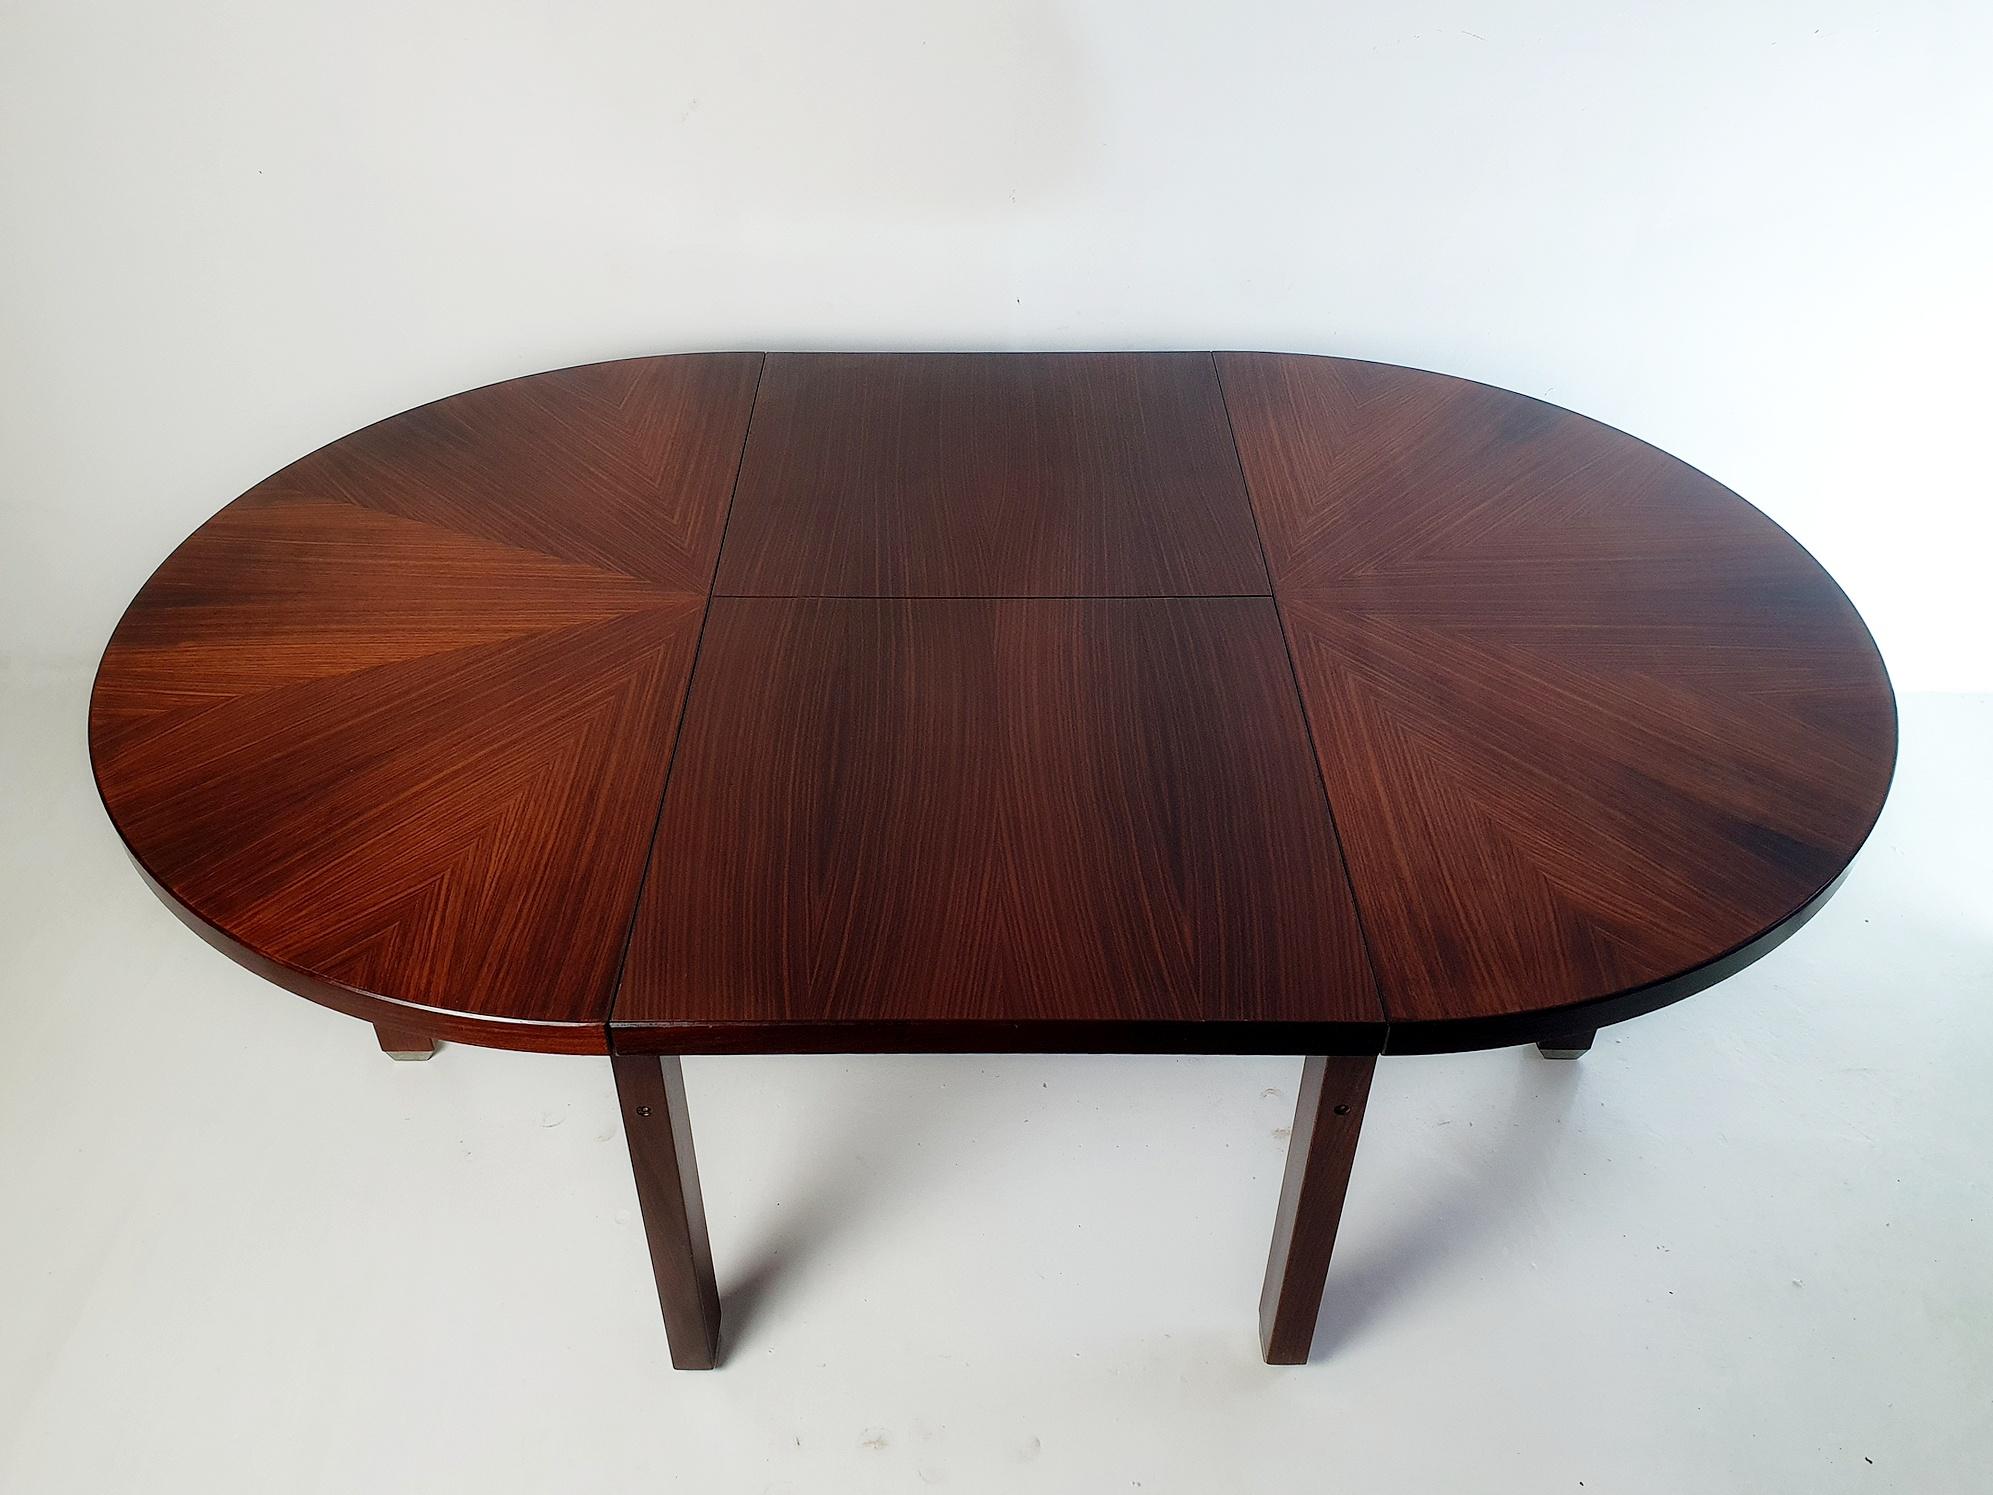 The round extendable dining table designed by Ico Parisi for MIM Roma in 1958 is a stunning piece of mid-century modern design that embodies the elegance and simplicity of the era. Ico Parisi was known for his functional and stylish designs, and